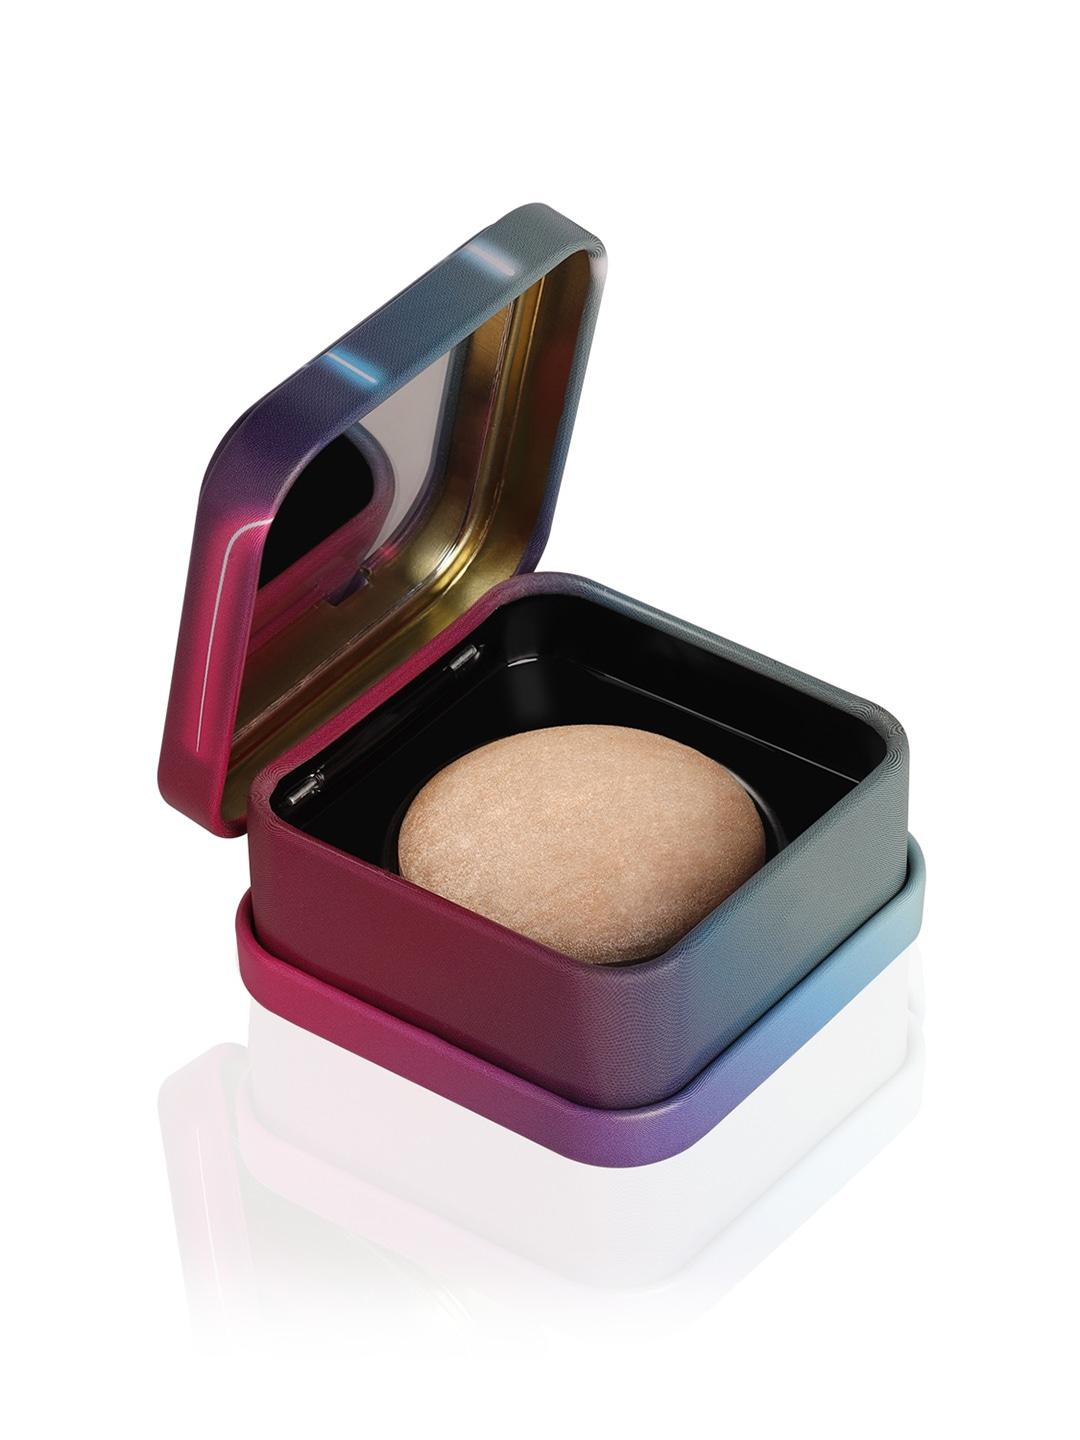 pac luminous weightless baked highlighter mini - iconic 02